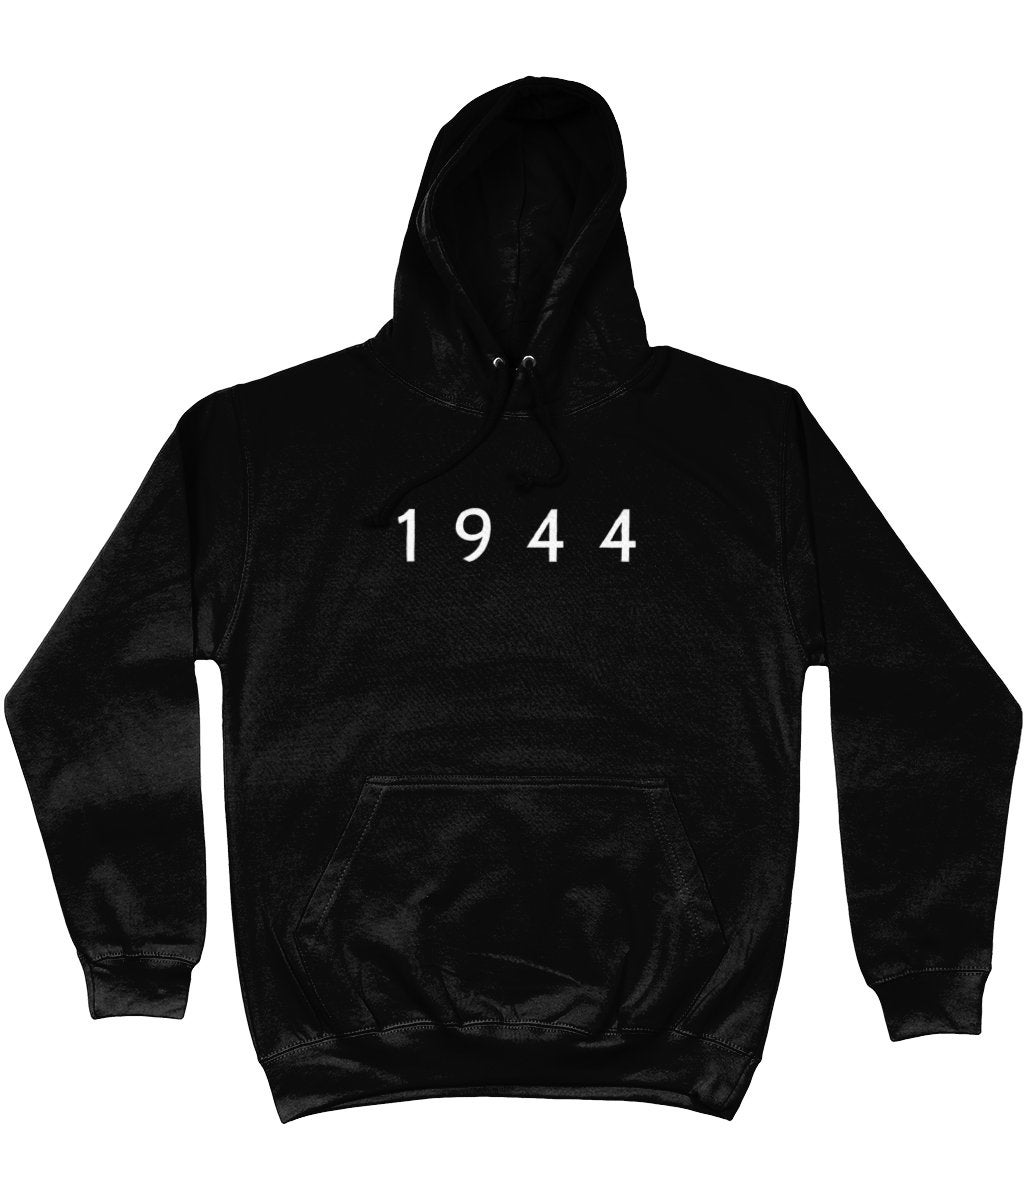 Adult WW2 1944 Hoodie for history buffs and reenactors. Etsy